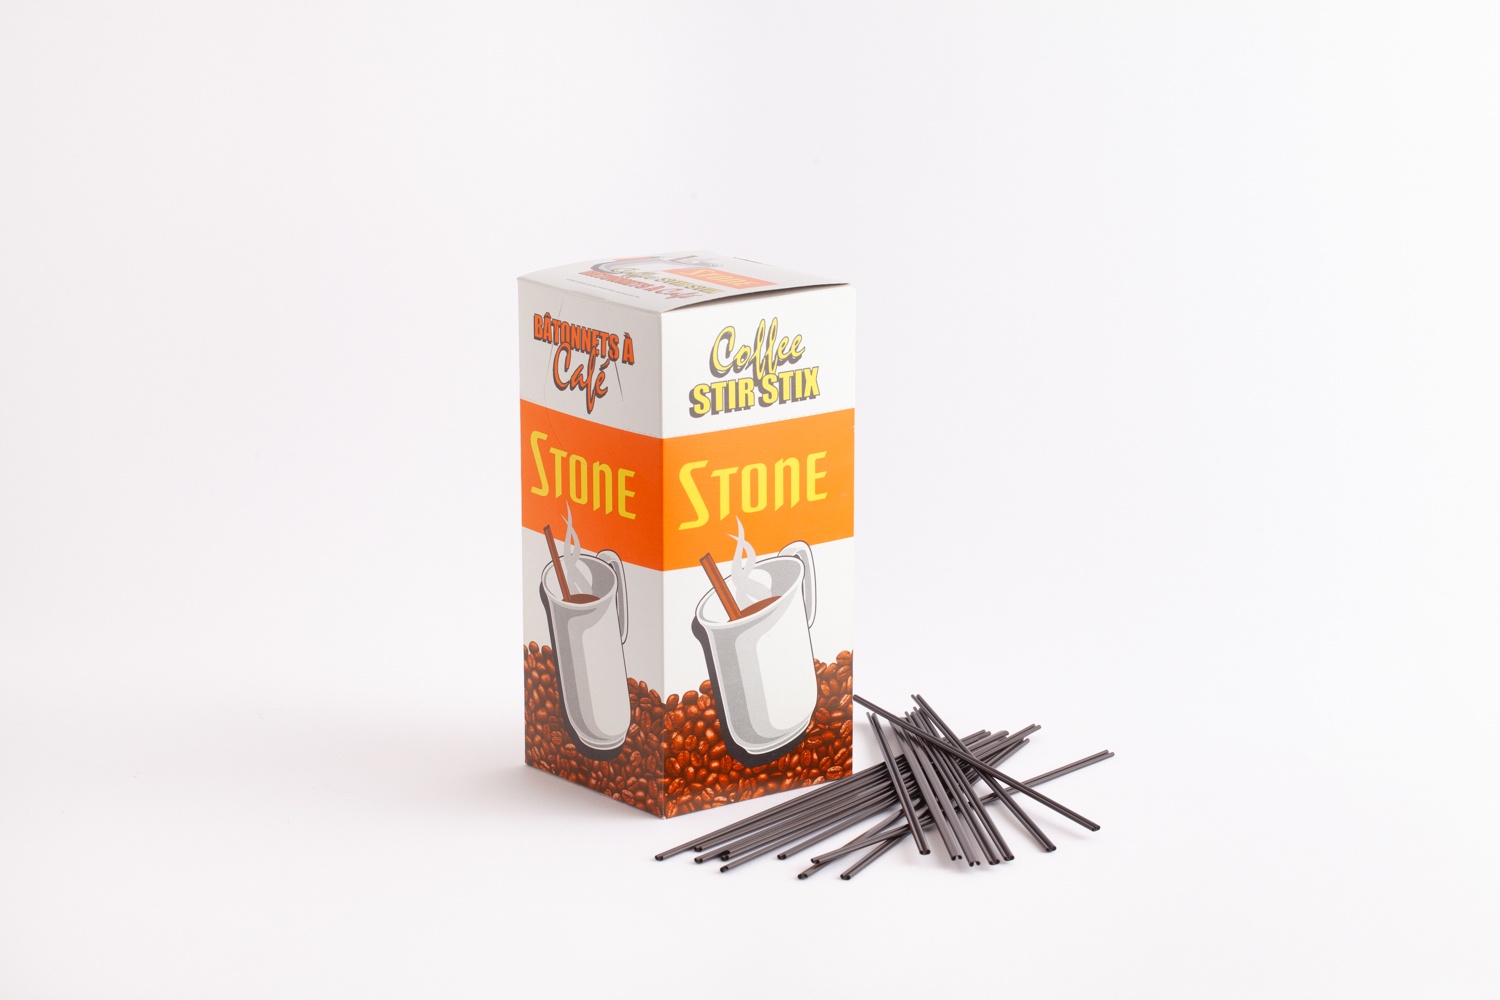 isolated product shot - stone coffee stirrer box and stirrers